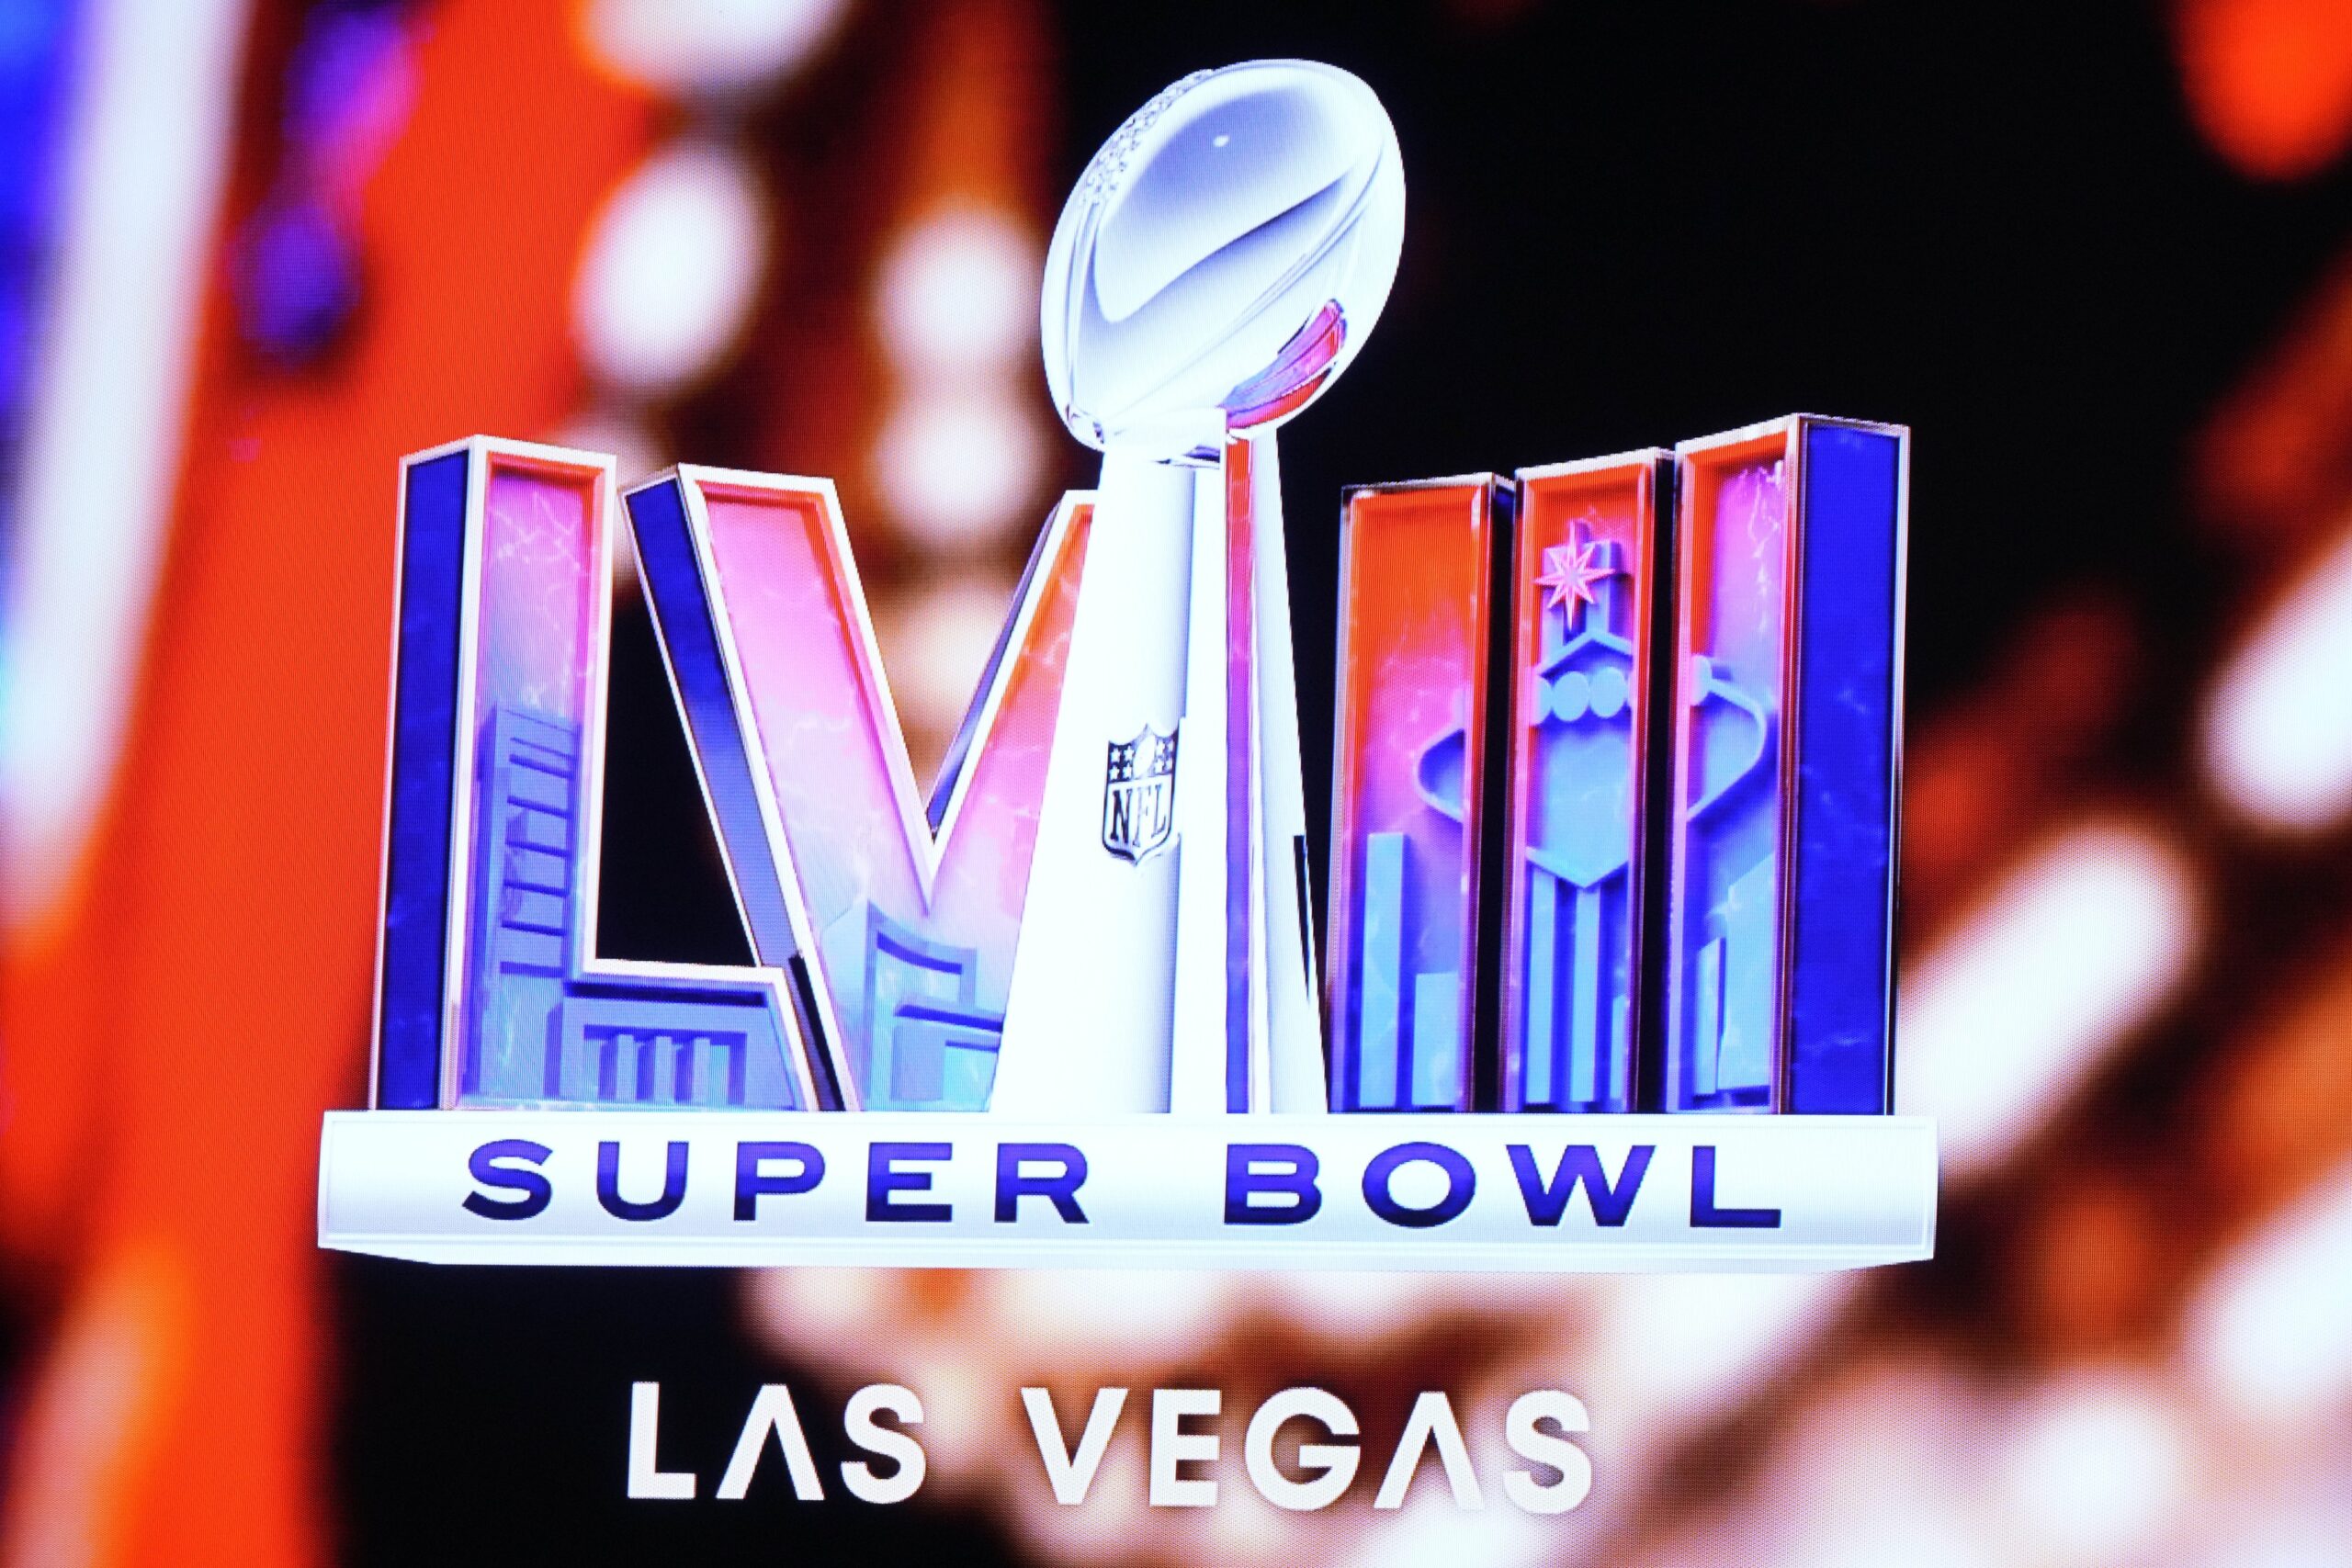 The Las Vegas Super Bowl LVIII logo at the Super Bowl Host Committee Handoff press conference at the Phoenix Convention Center.